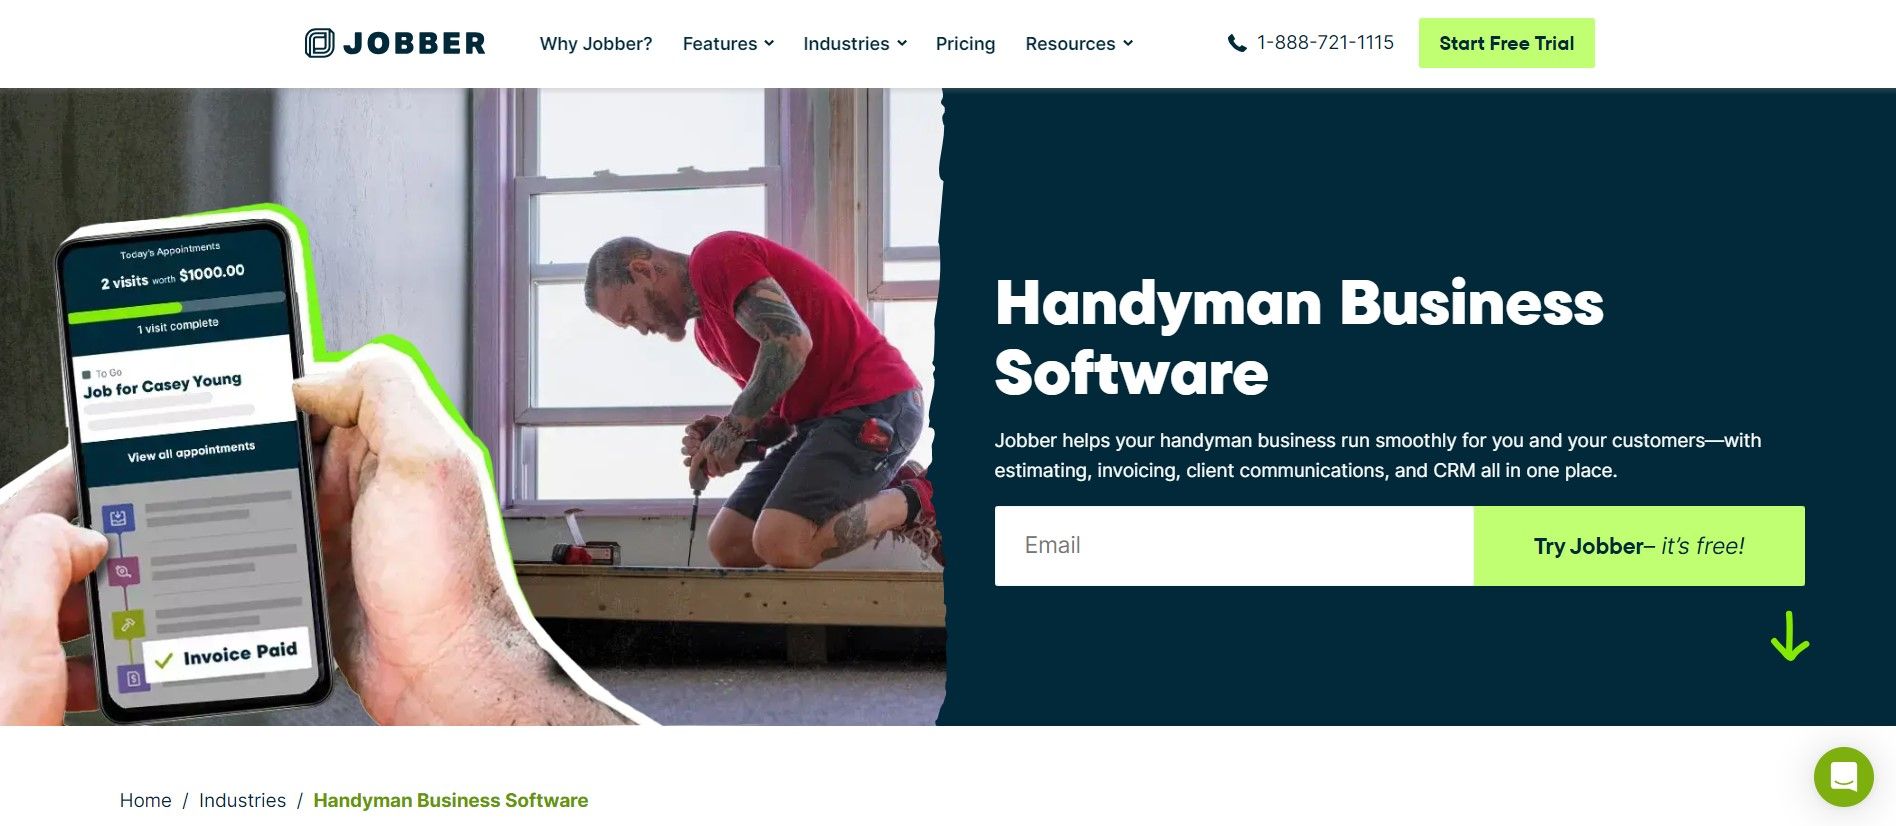 Jobber website page showing handyman working and mentions 'handyman business software'